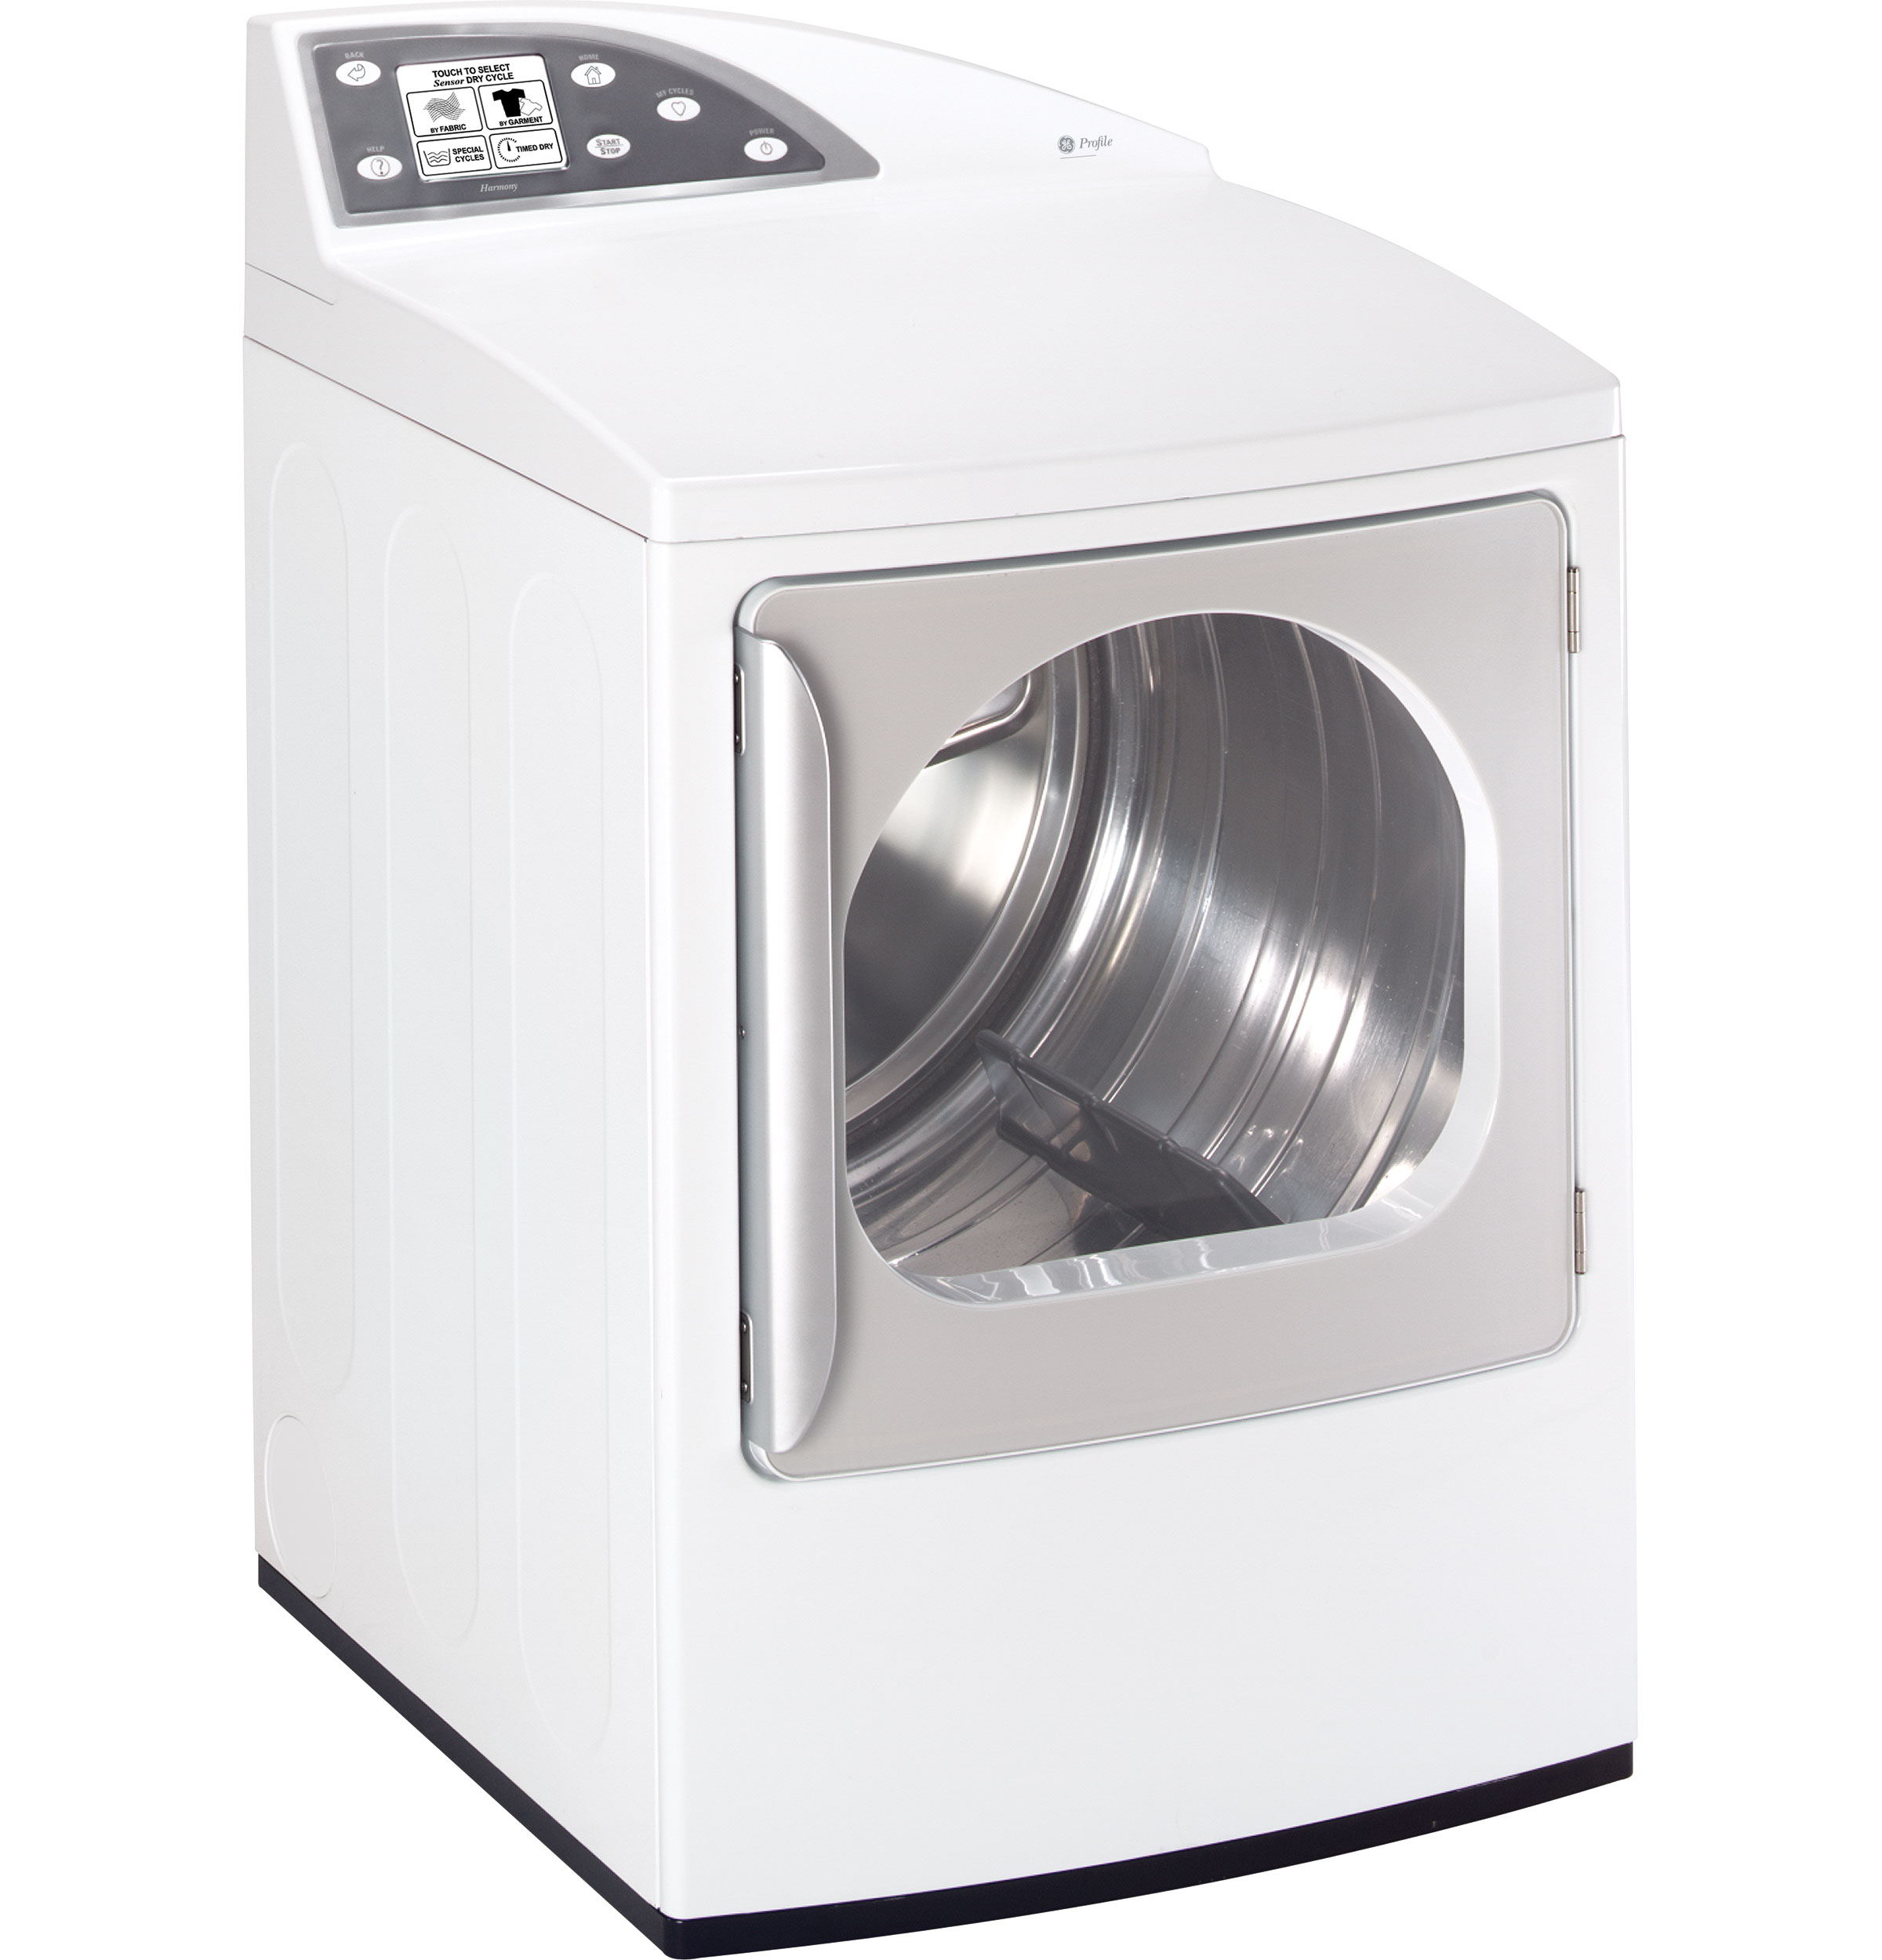 GE Profile Harmony™ 7.3 Cu. Ft. Capacity King-size Electric Dryer with Stainless Steel Drum